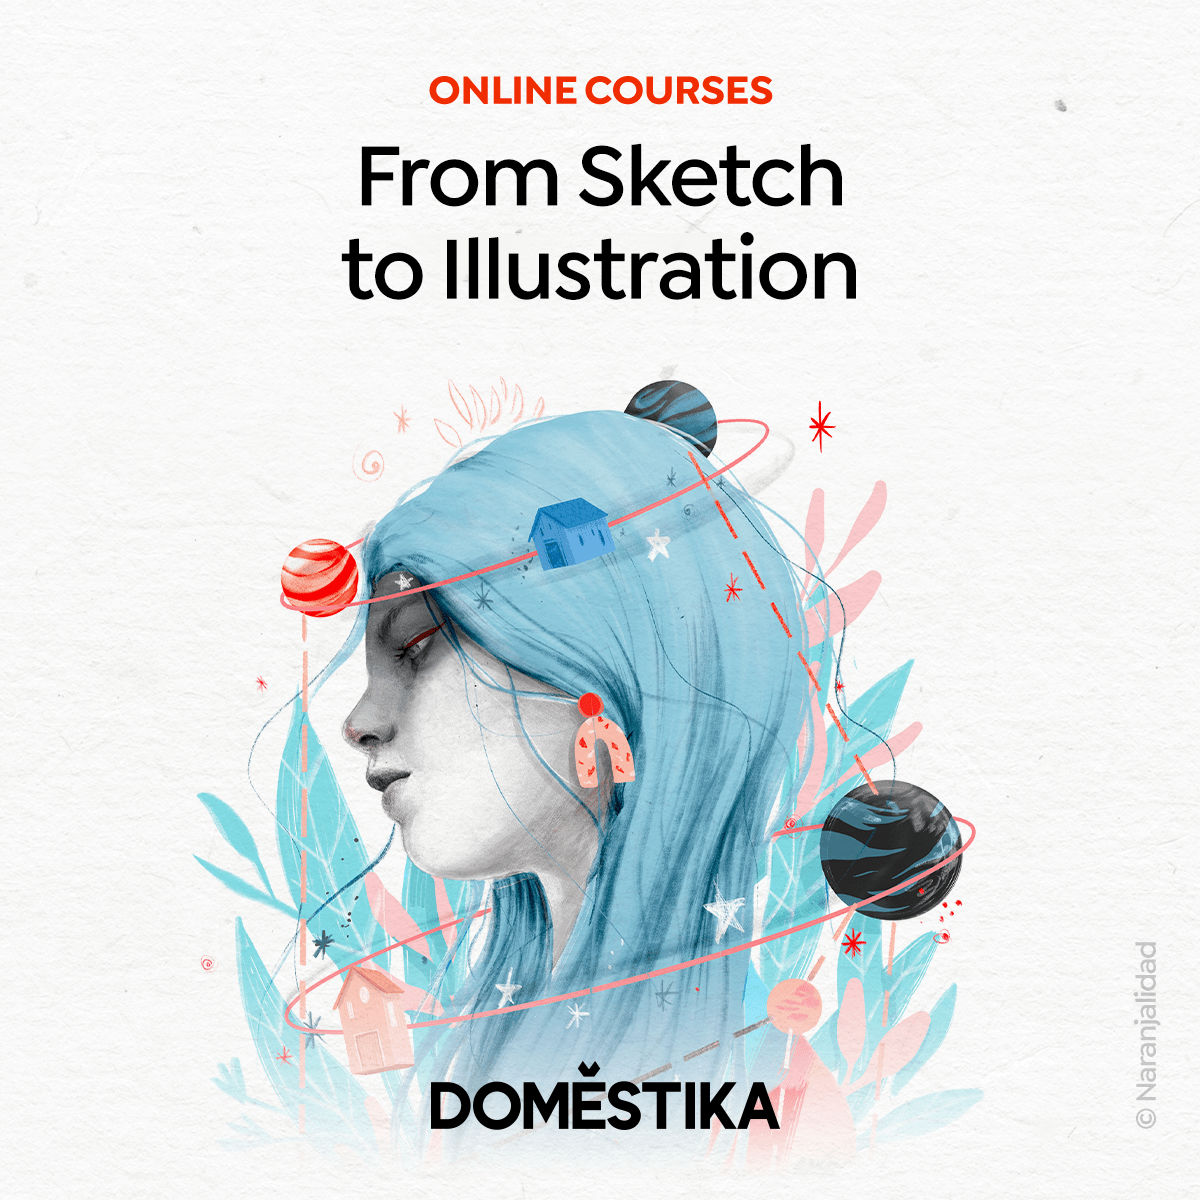 Domestika: From Sketch to Illustration